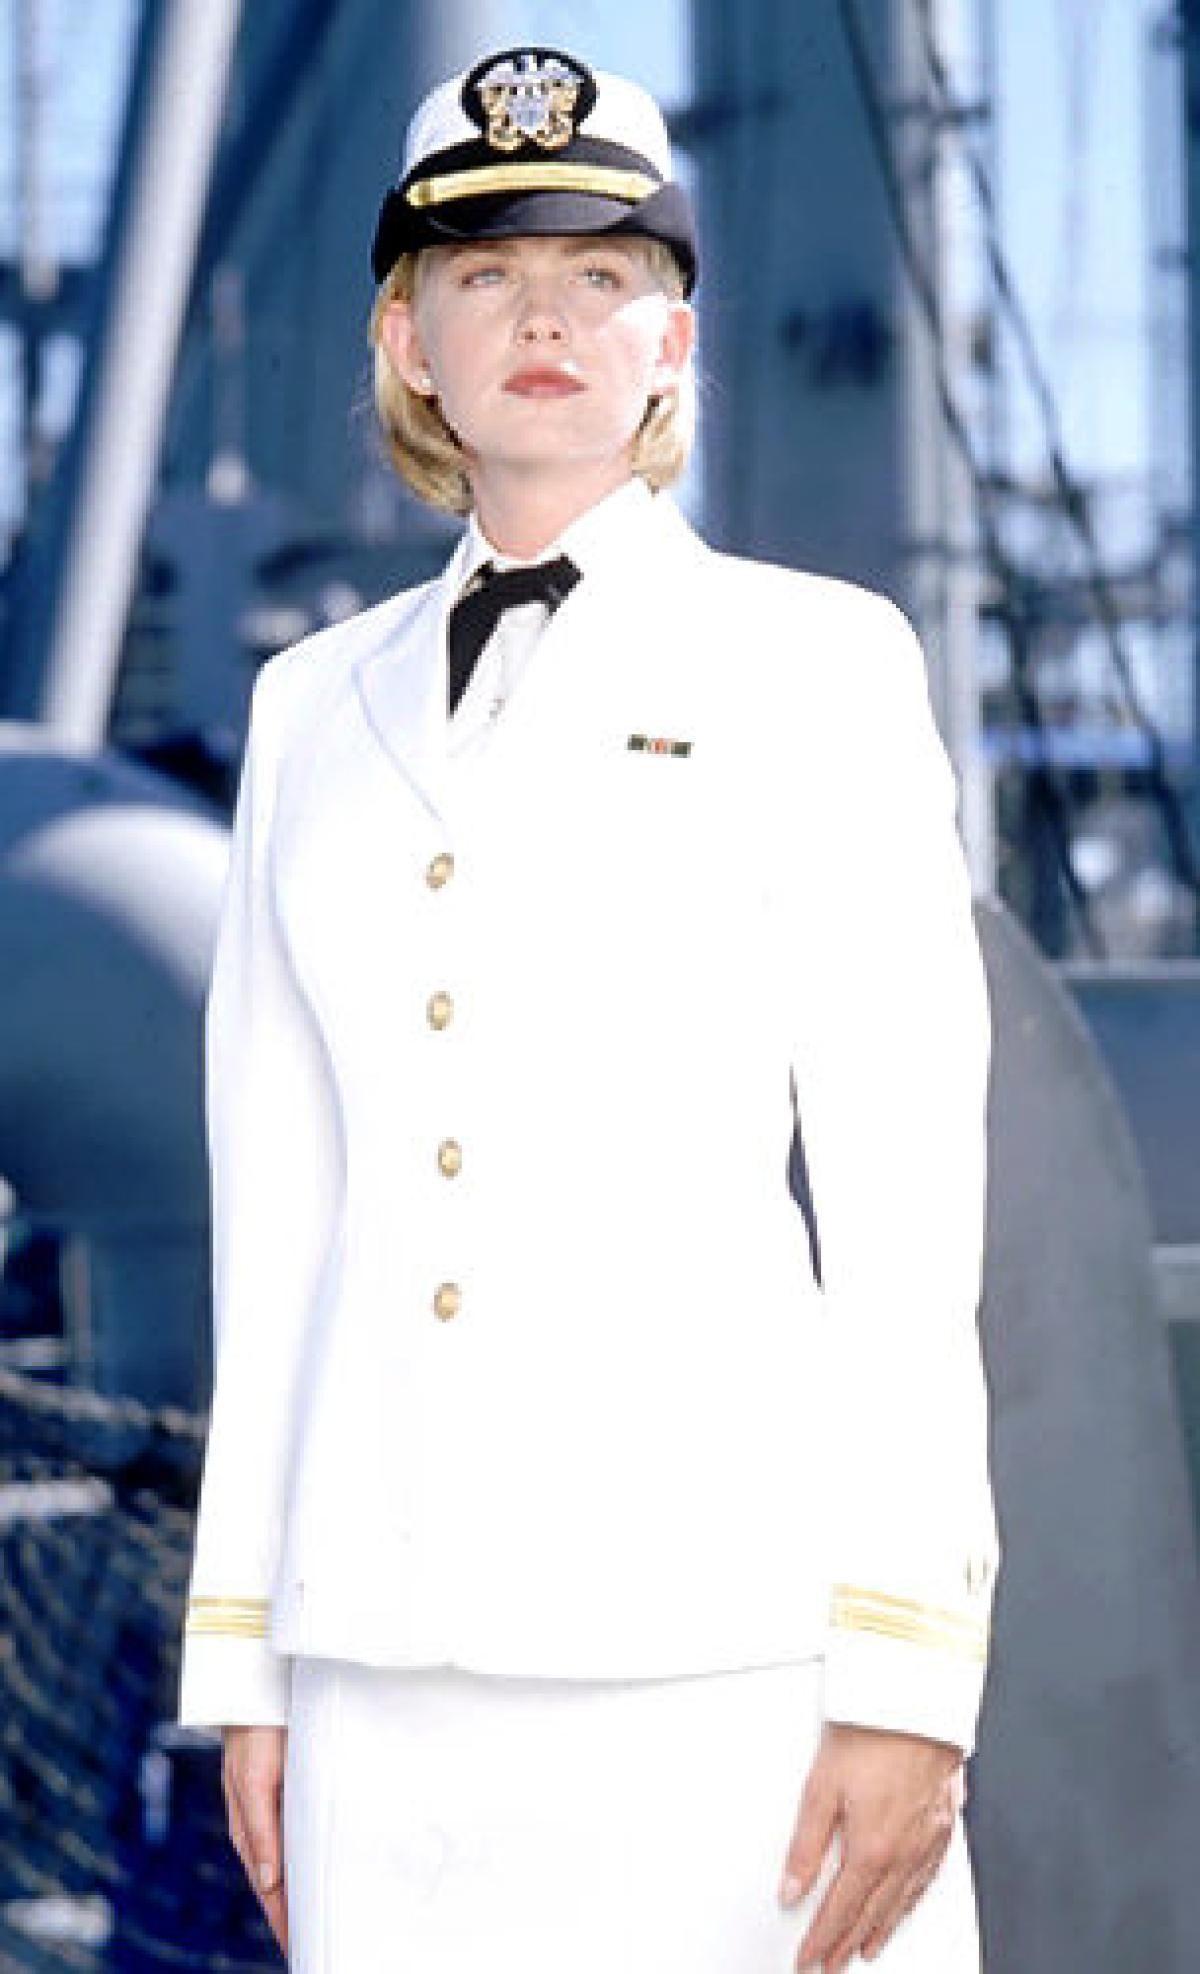 Women in uniform 17. Women of the armed forces. Us navy